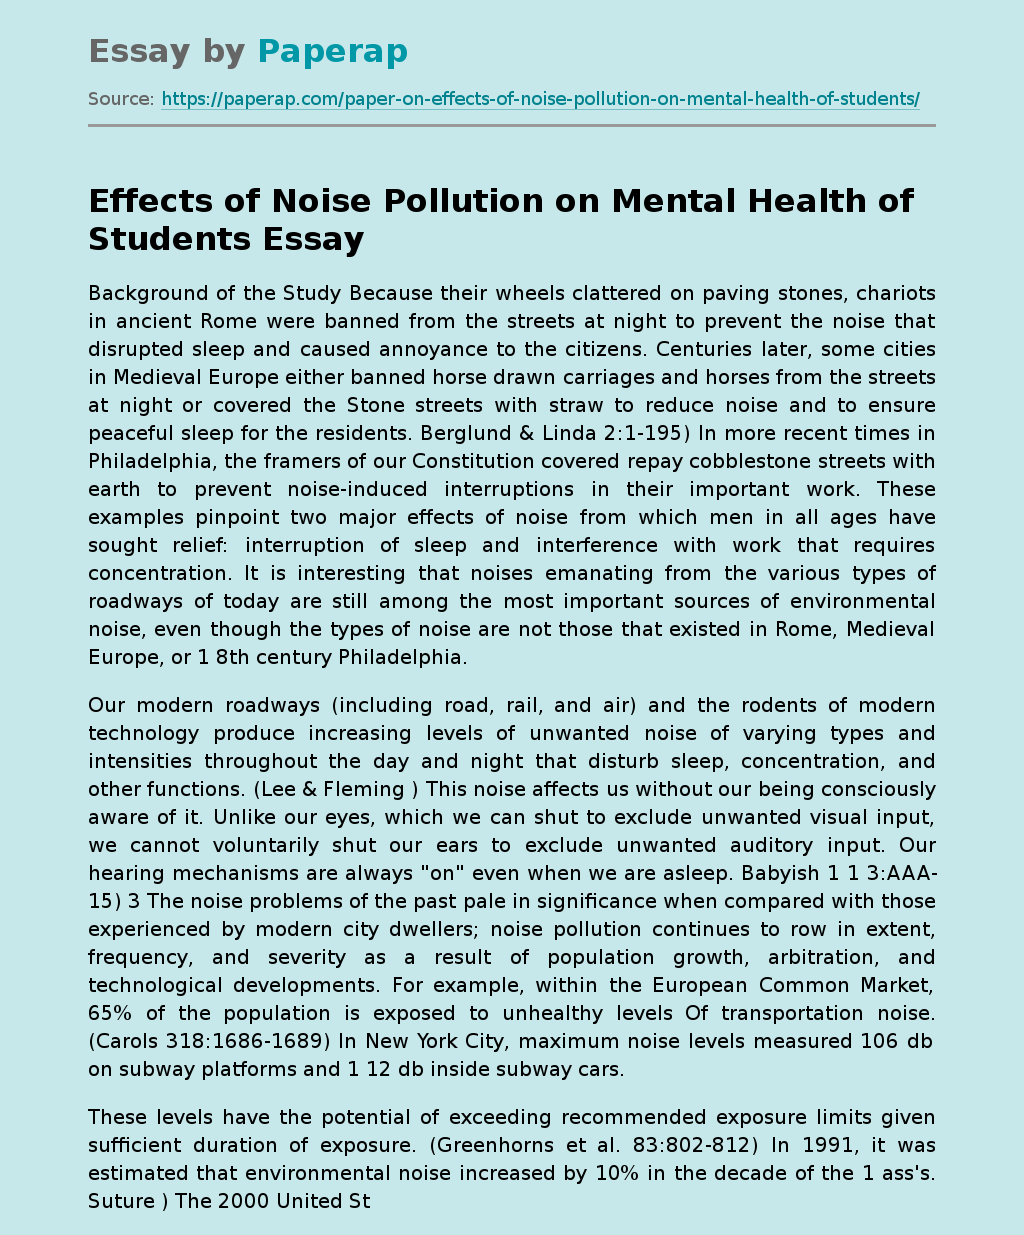 Effects of Noise Pollution on Mental Health of Students